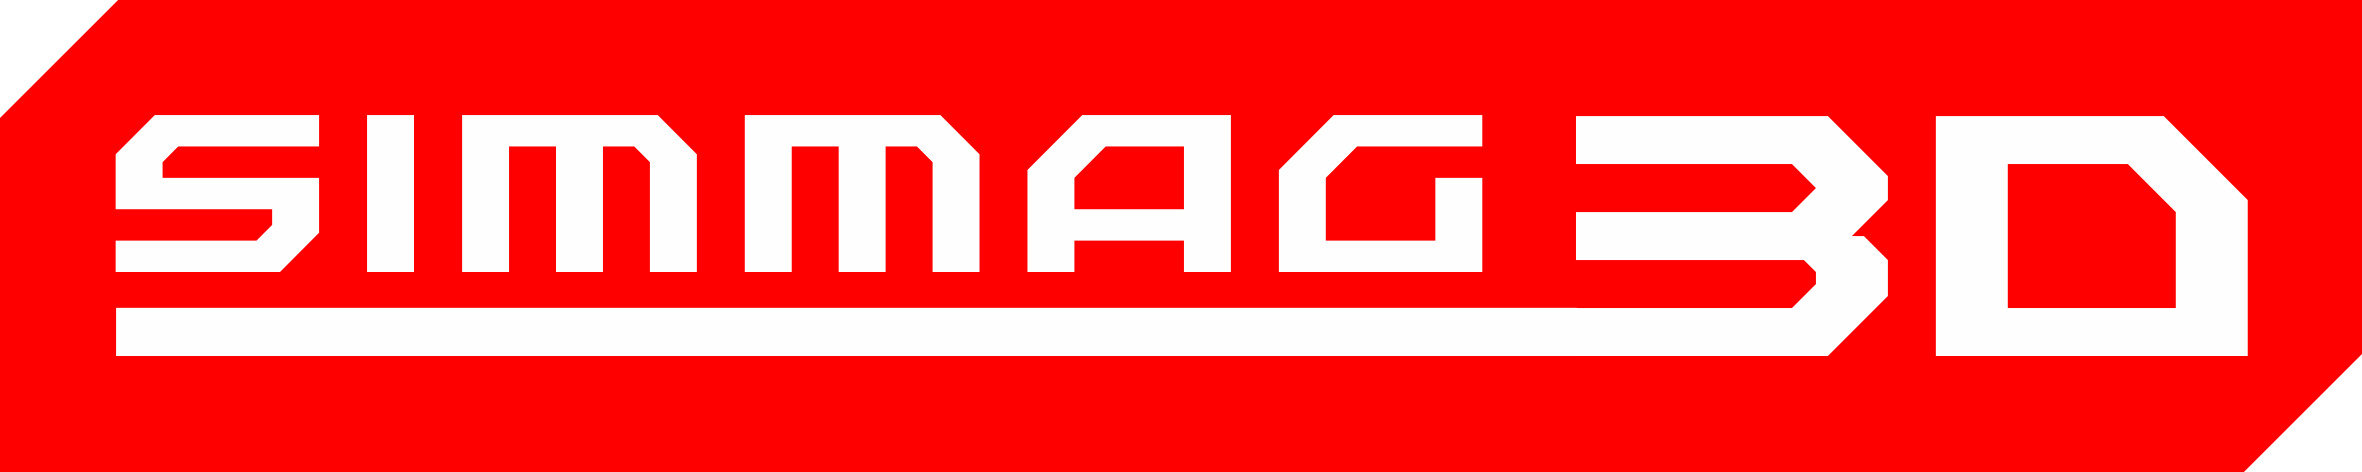 Logotype of the SIMMAG3D system. On a red horizontal background with two cut corners, a white inscription SIMMAG3D expressed in a geometric typeface